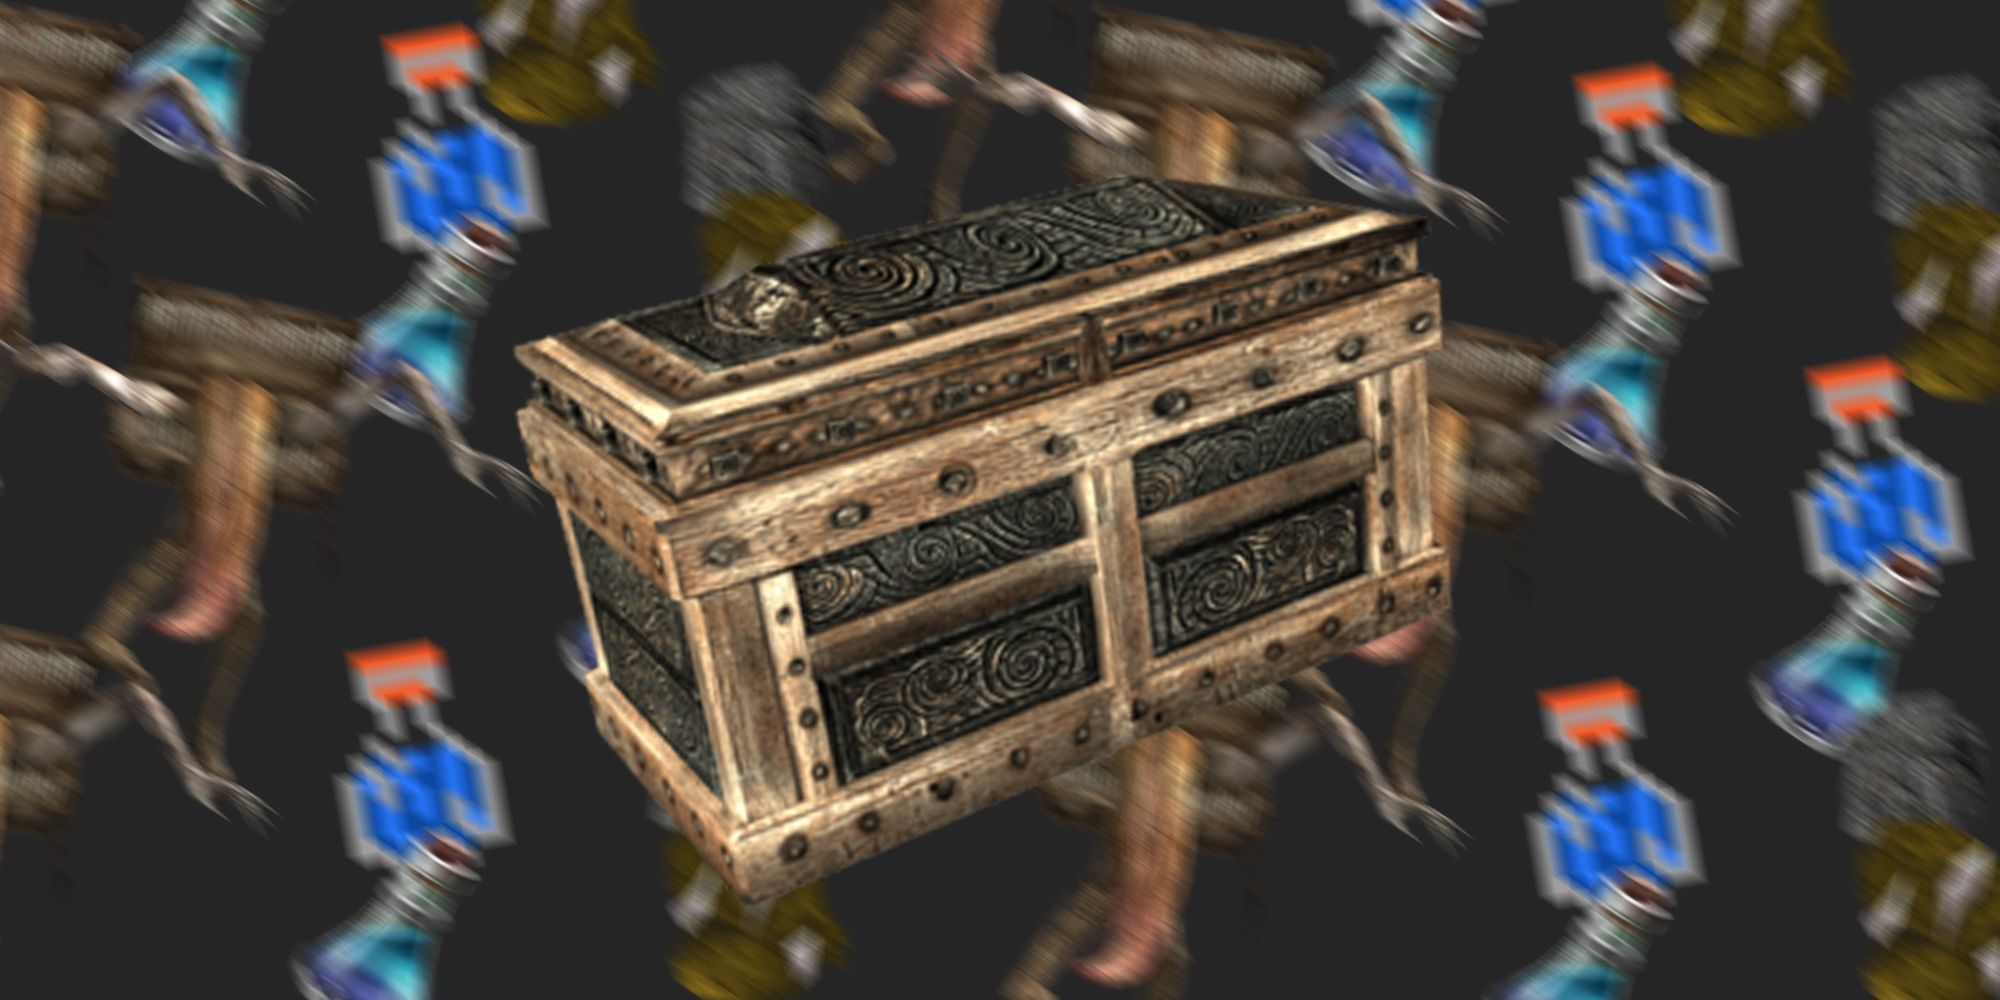 Skyrim Chest, Minecraft and Witcher potions, Runescape and New World iron